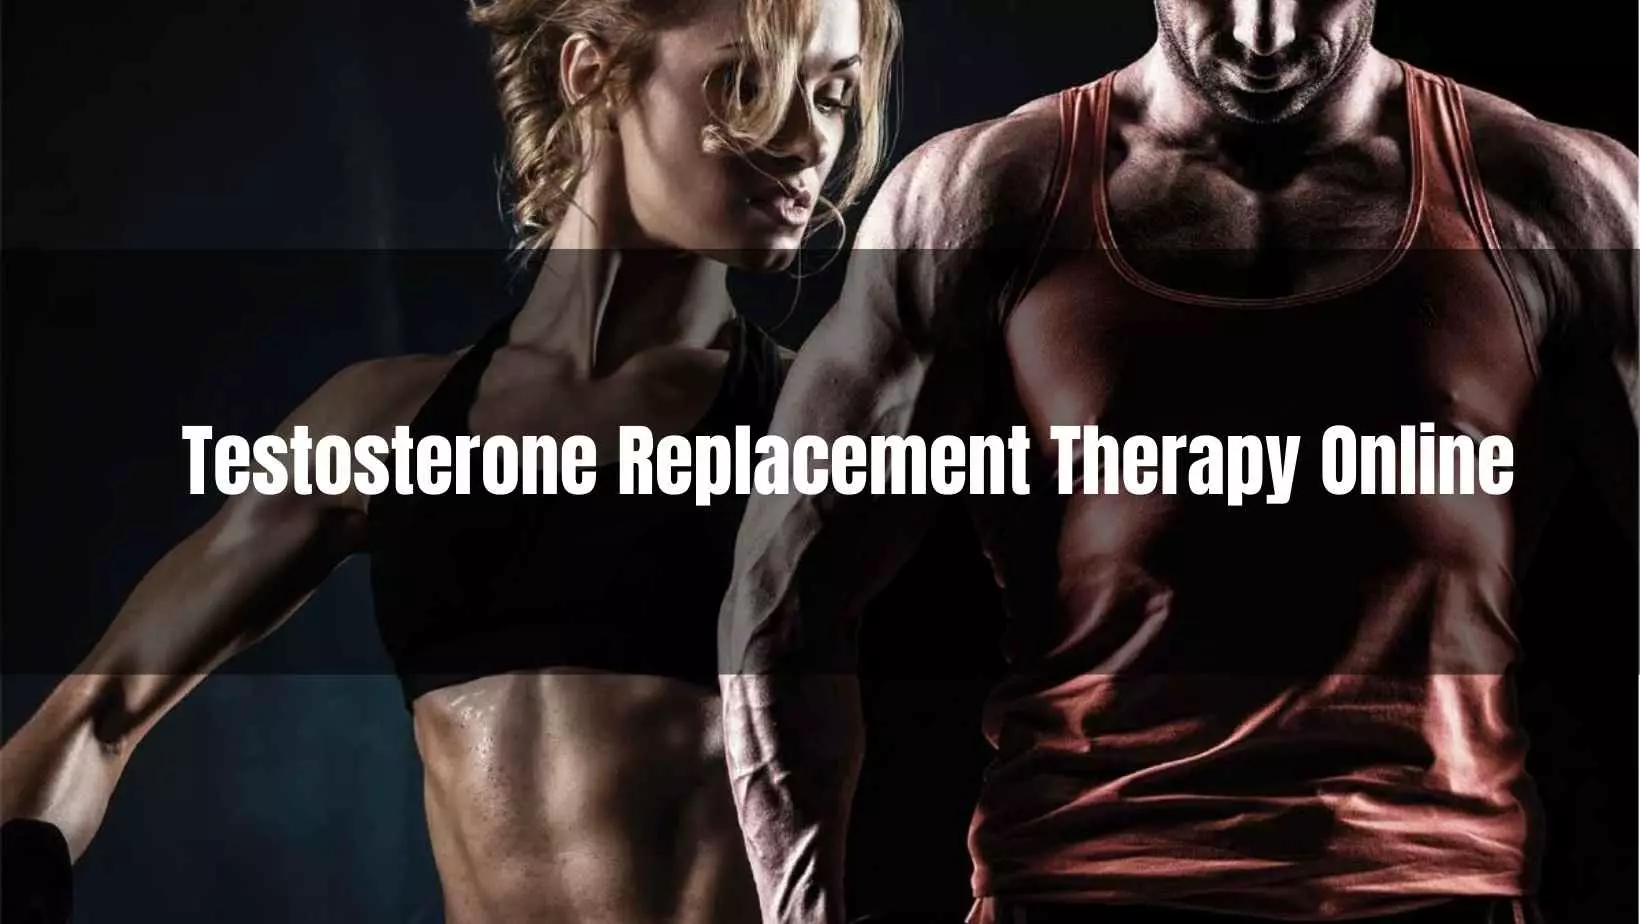 tosterone_Replacement_Therapy_Online